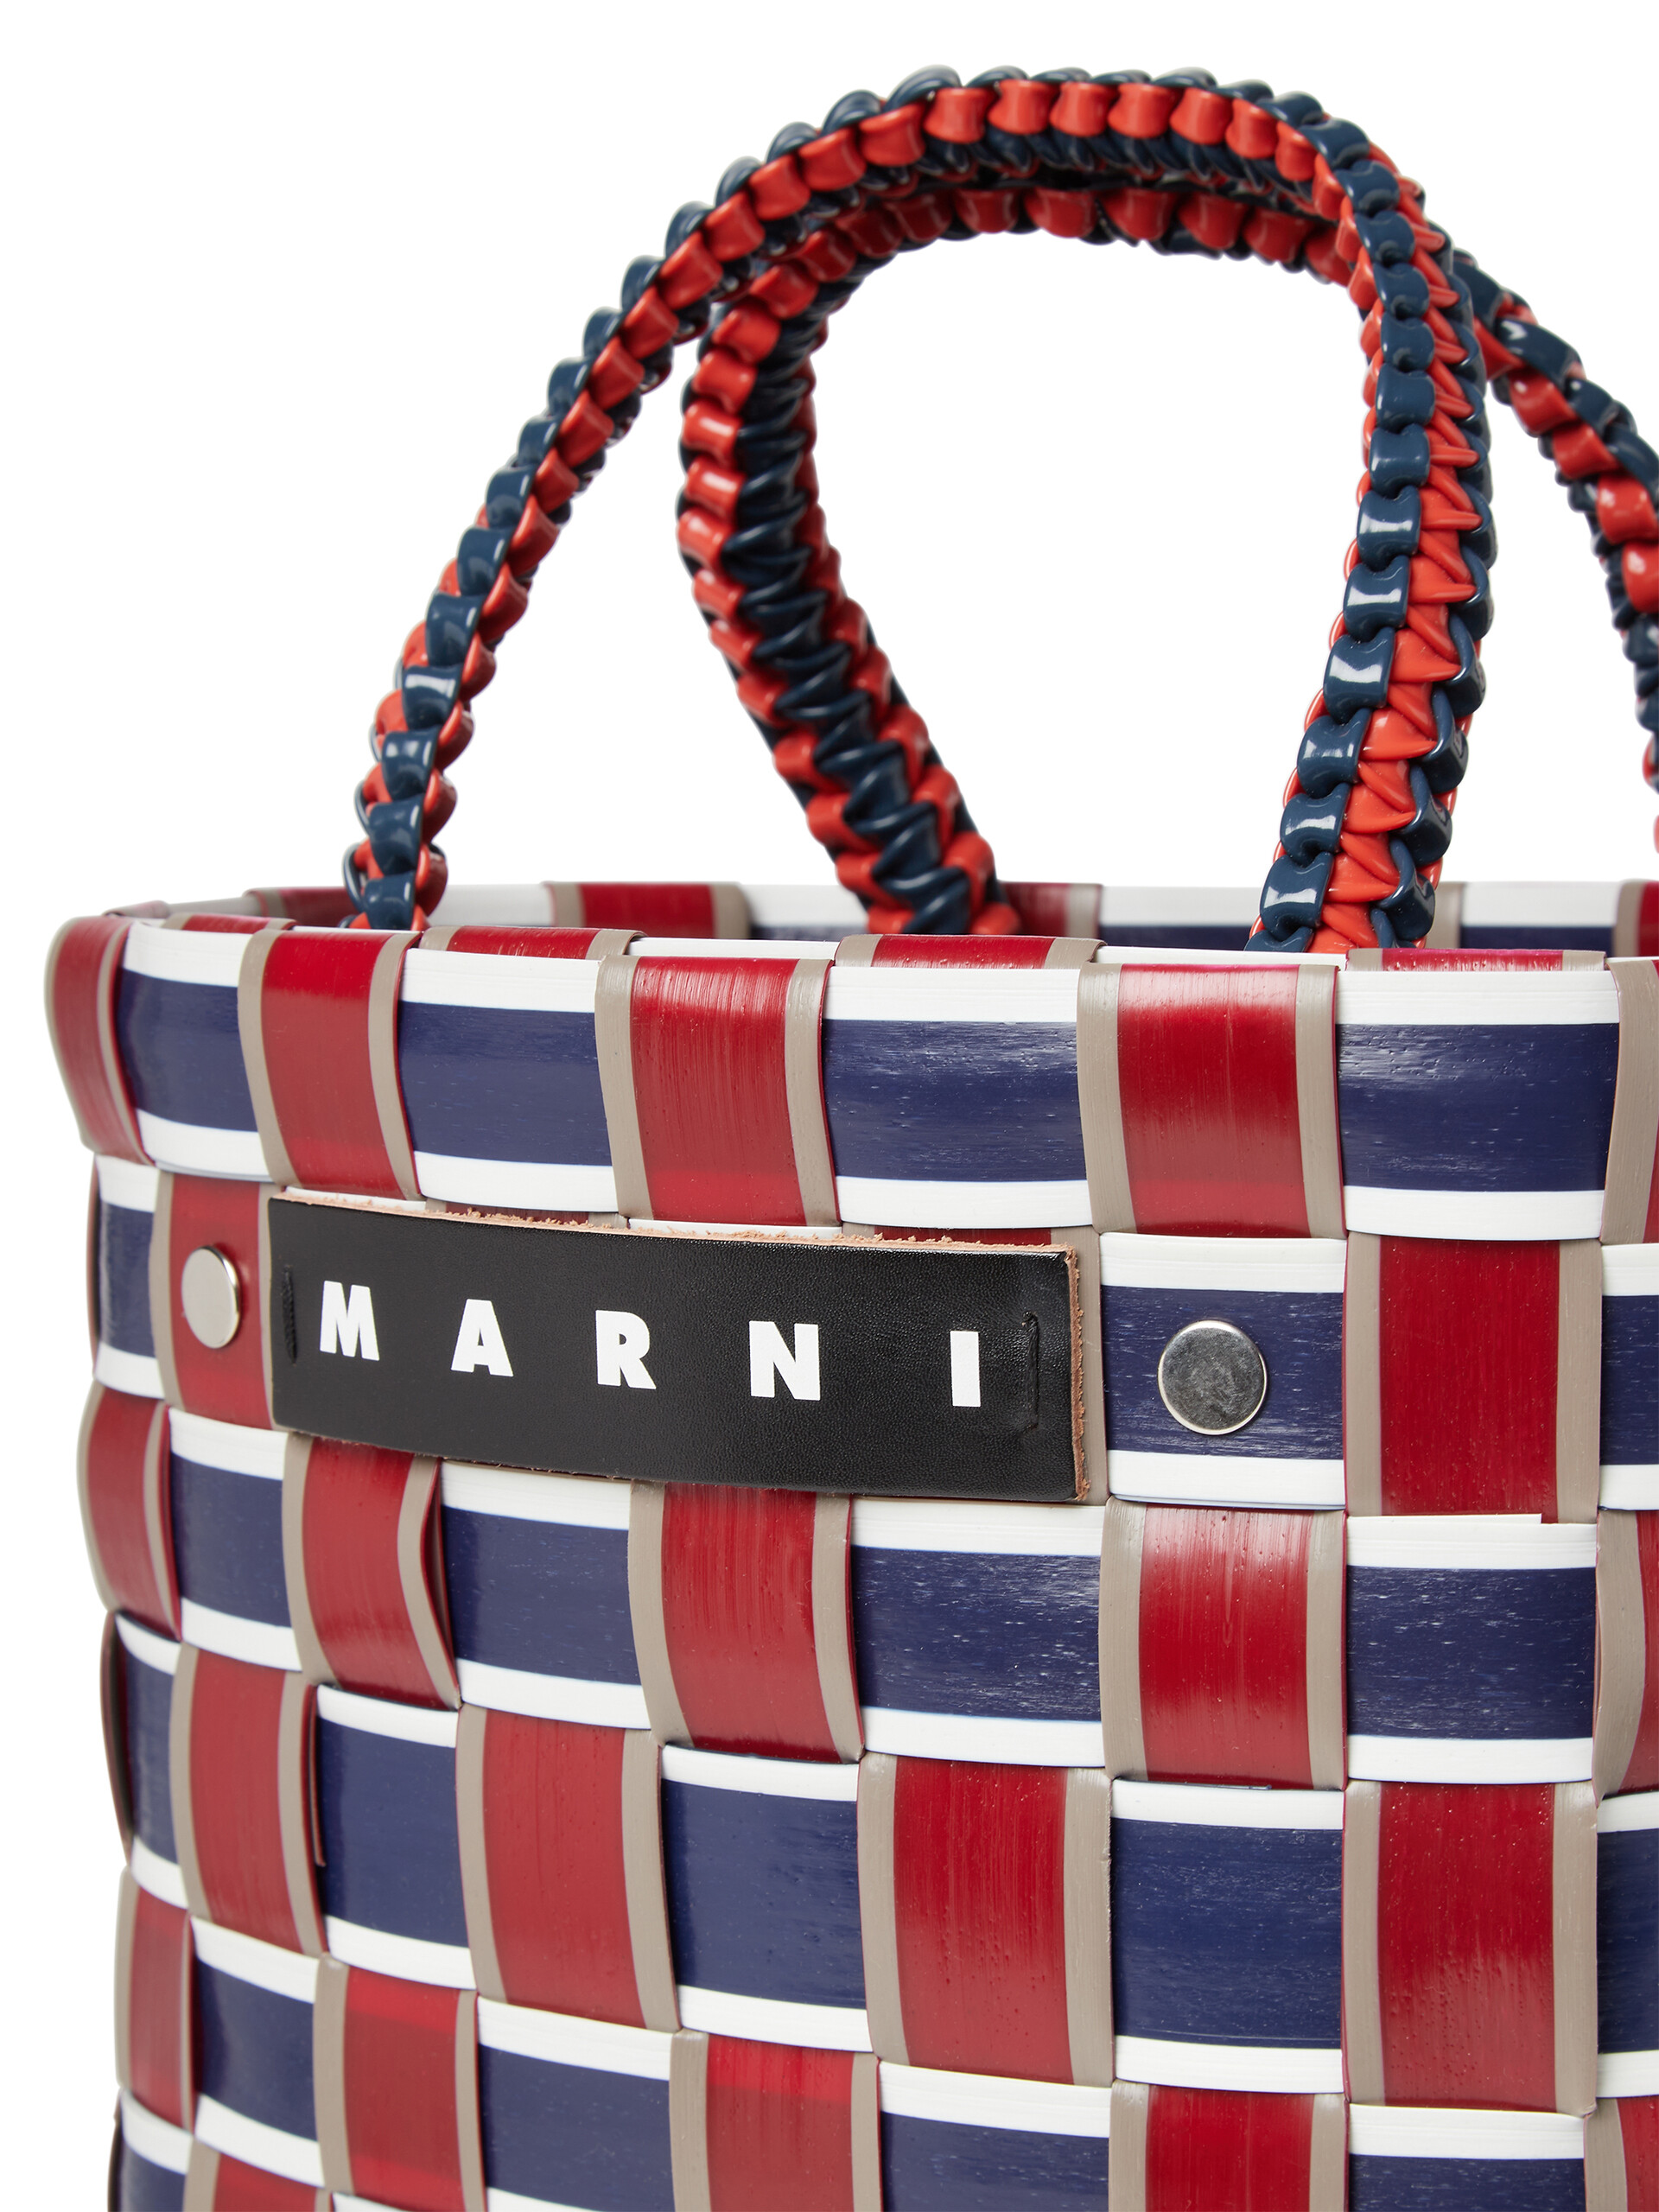 MARNI MARKET TAPE BASKET bag in blue and red woven material | Marni